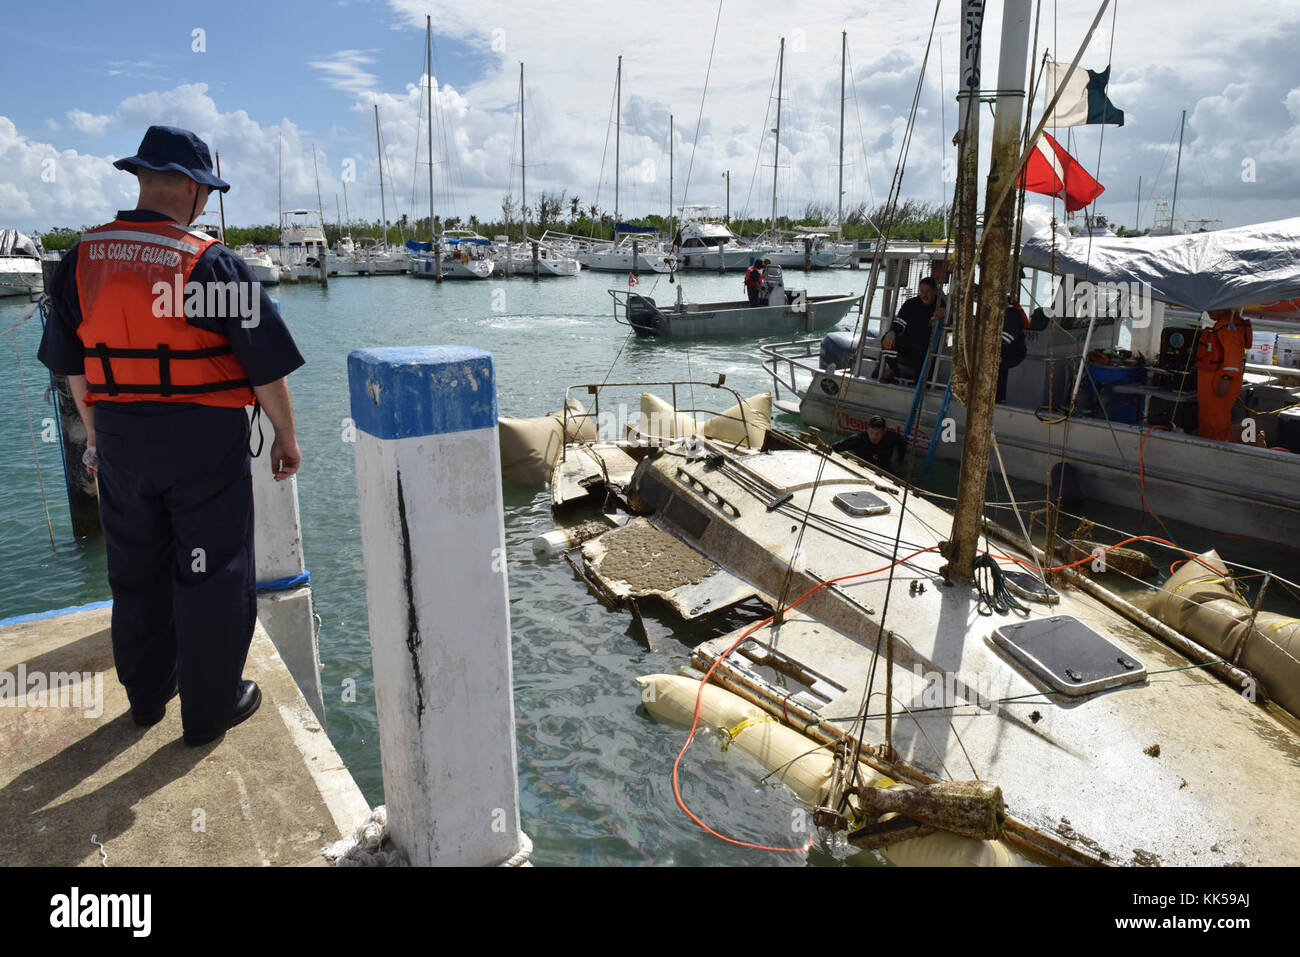 U.S. Coast Guard Chief Warrant Officer Christopher Runt observes a local salvage team as they refloat the sailing vessel Juyilanga at the Isleta Marina in Fajardo, Puerto Rico, on November 10, 2017. The dive team positioned salvage air bags underneath the vessel to refloat it after Hurricane Maria caused damage to the vessel’s starboard side. U.S. Coast Guard photo by Petty Officer 2nd Class Ali Flockerzi. Stock Photo